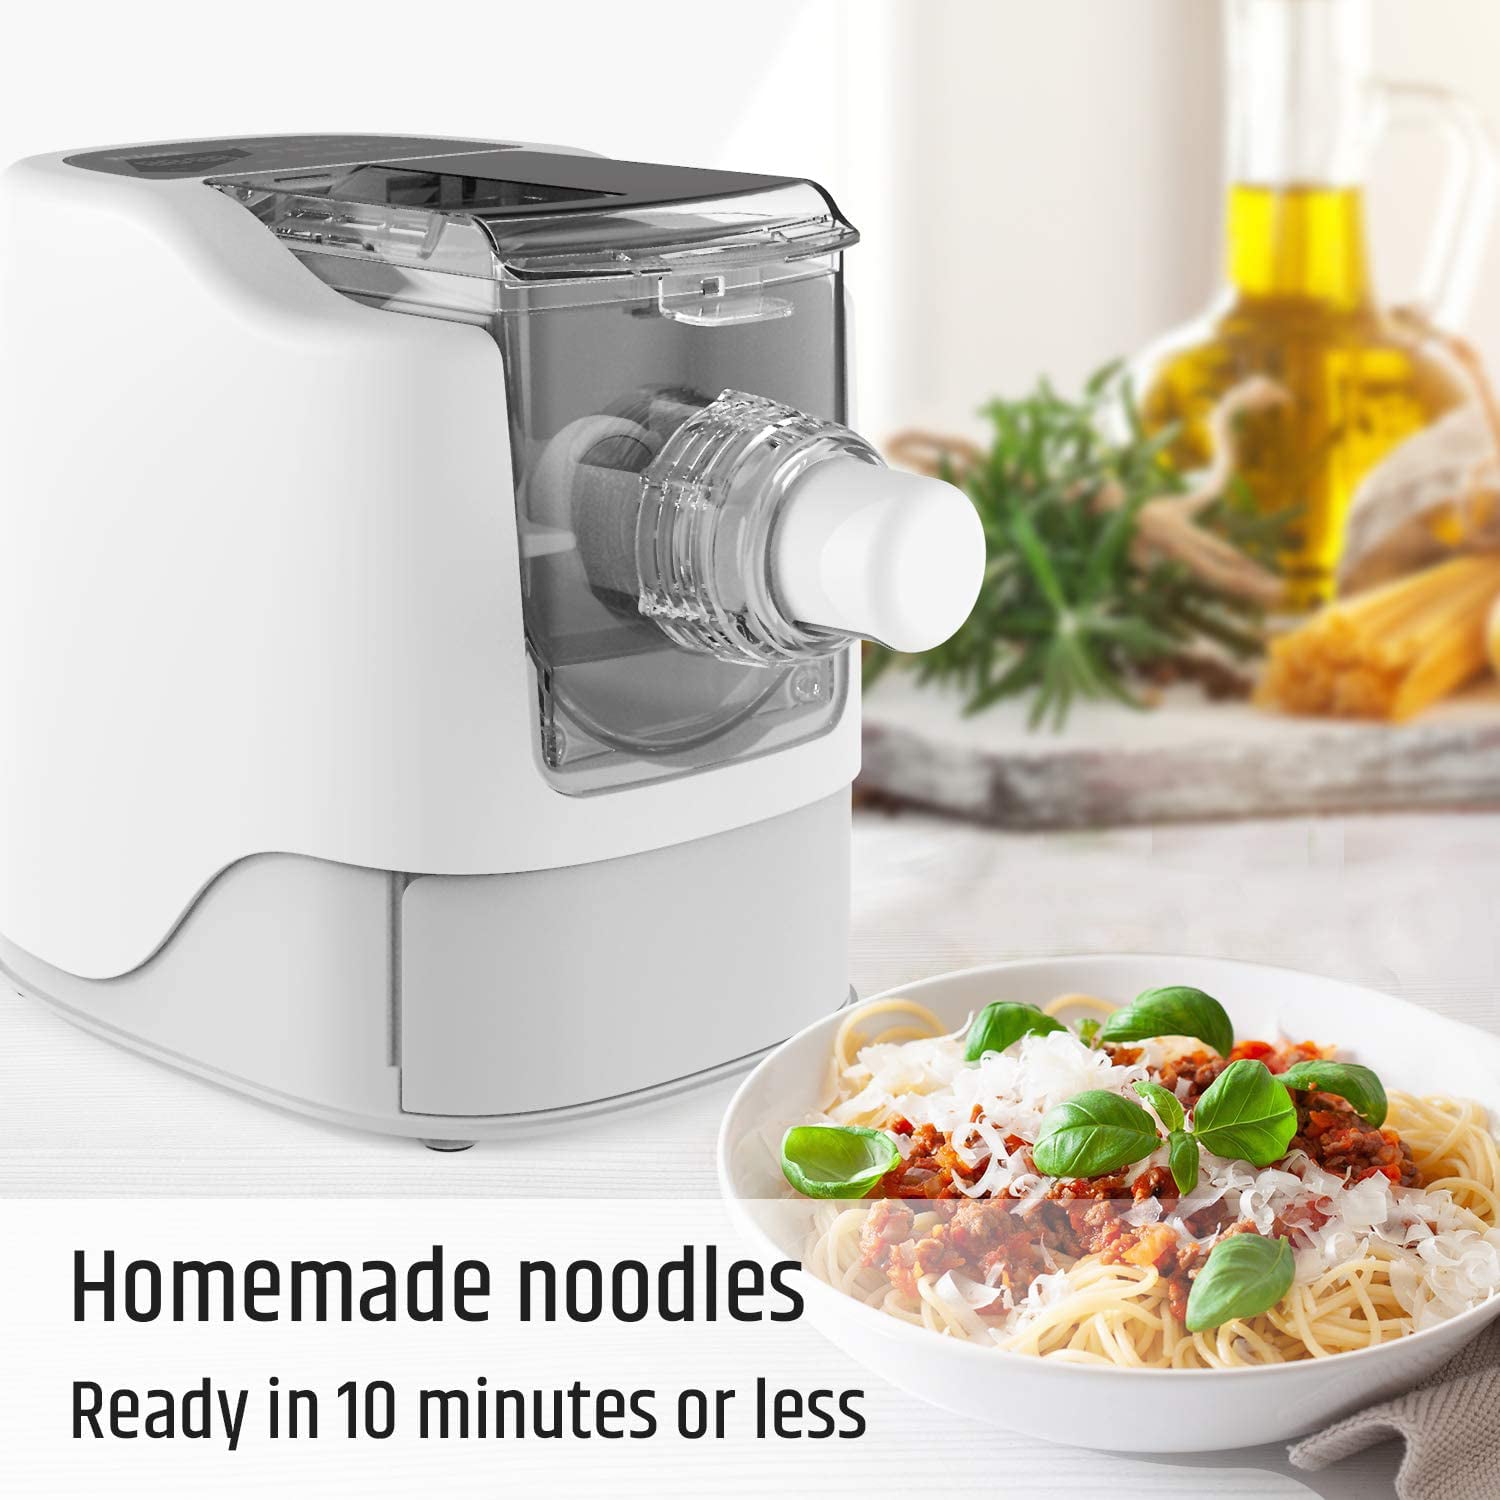 Electric Pasta Noodle Maker, Mixes, Kneads and Extrudes in 10 Minutes, 13  Interchangeable Pasta Disc Attchment with Built-in Storage Drawer 